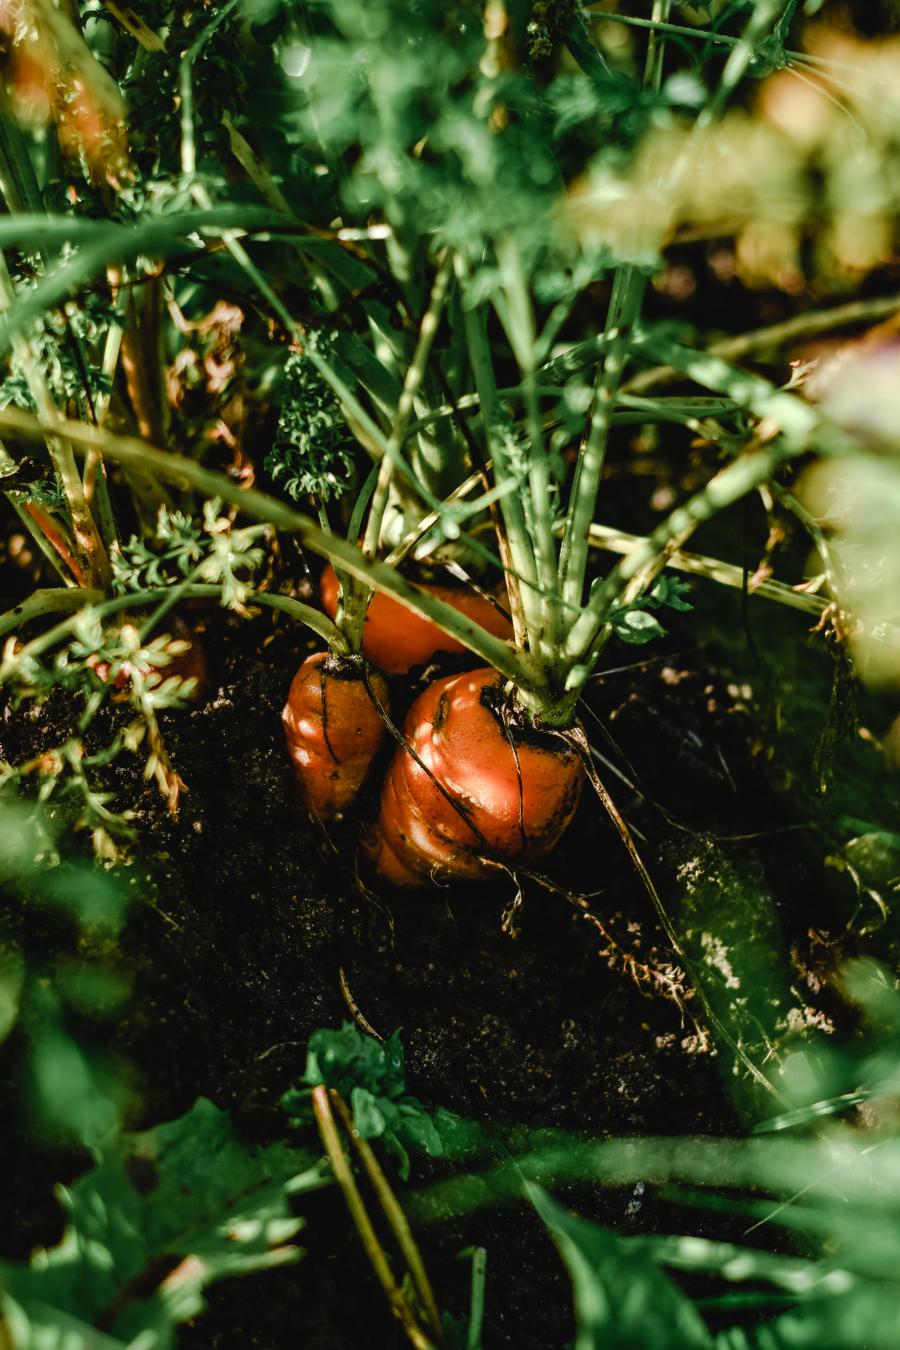 A cluster of orange carrots with green leafy tops growing in dark brown soil